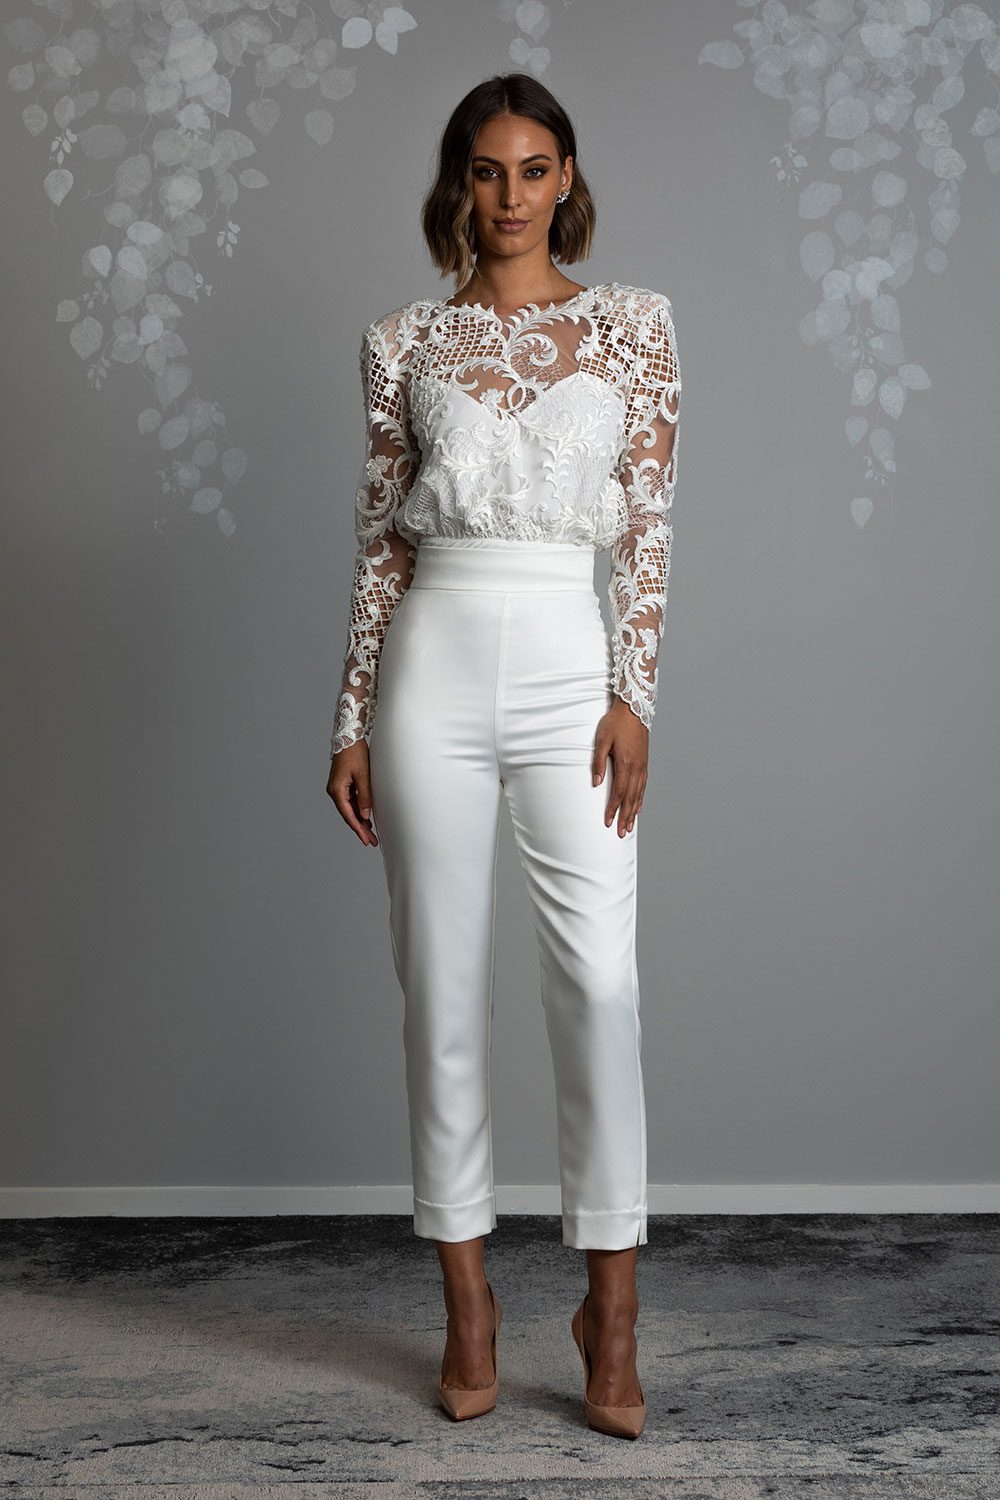 Ava Wedding Trousers and Blouse from Vinka Design - Elegantly tailored trouser combined with a beautiful lace blouse for the Modern Bride. The blouse features a high neck and low back, with in-built camisole, fitted sleeves, & pearl buttons. Model in full front view showing off the beautiful lace blouse with stylish high waisted fitted pants